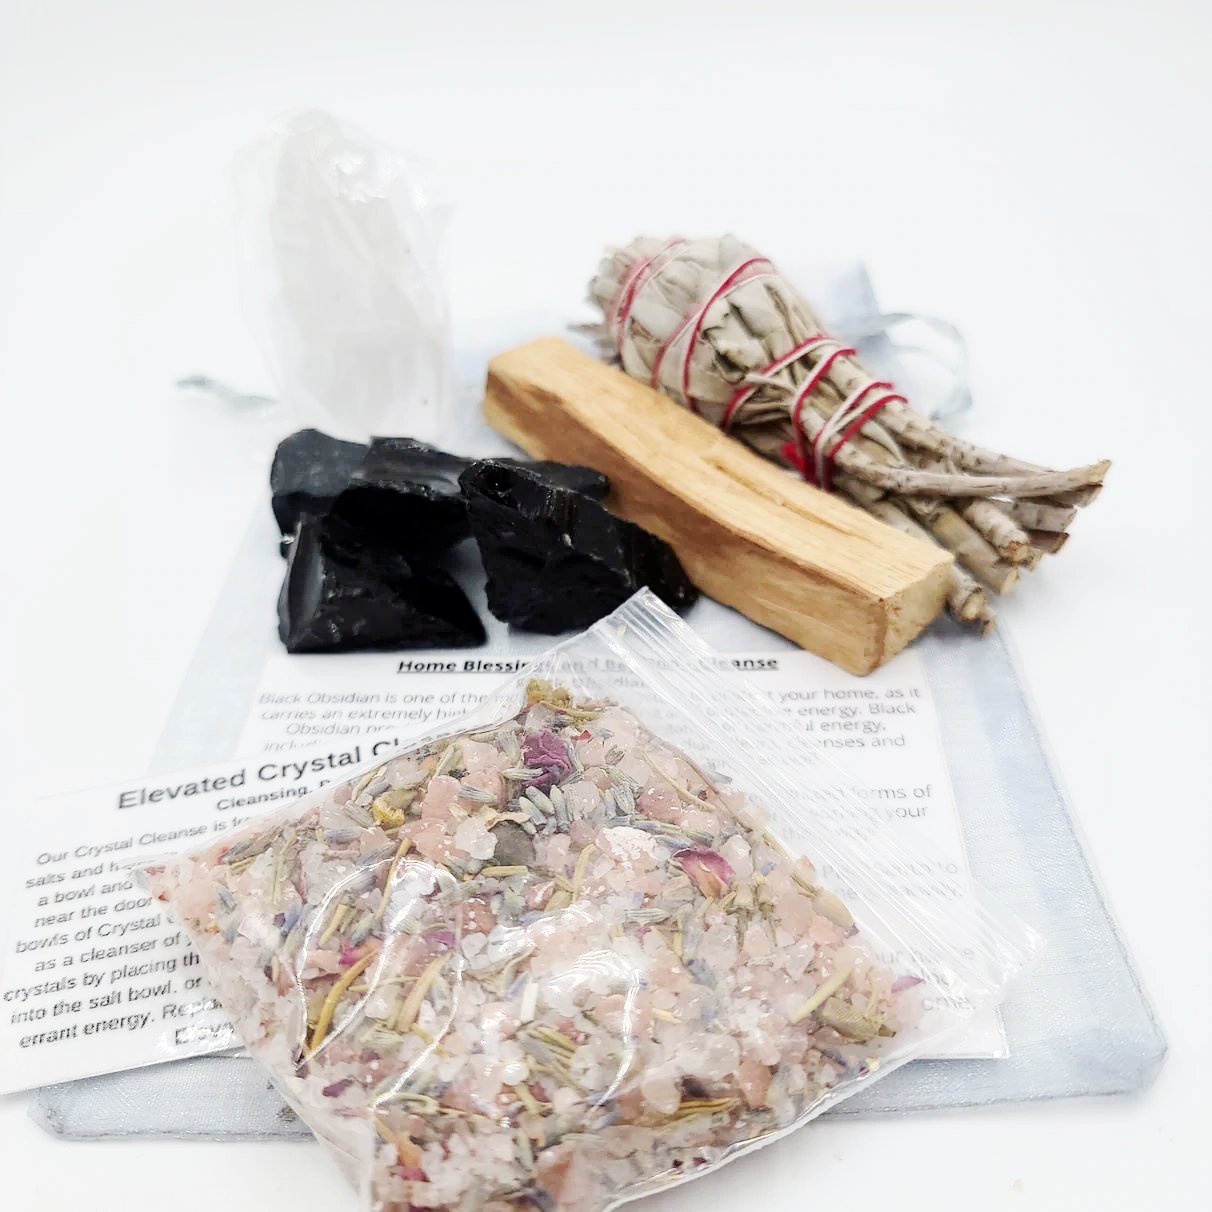 Home Blessings and Beyond - Stone & Cleanse Set - Elevated Metaphysical